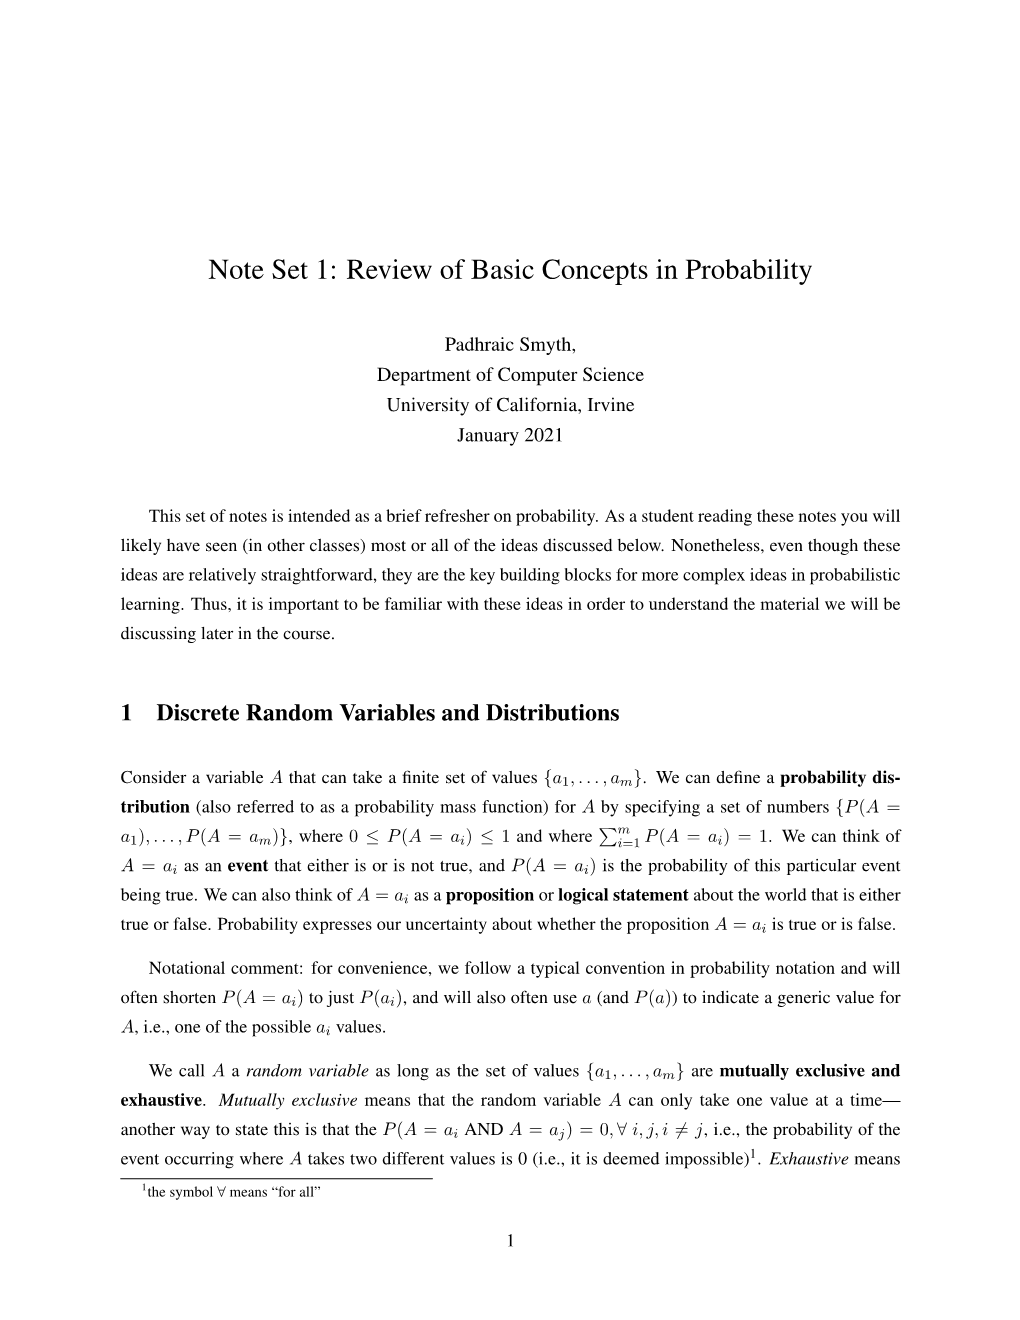 Note Set 1: Review of Basic Concepts in Probability